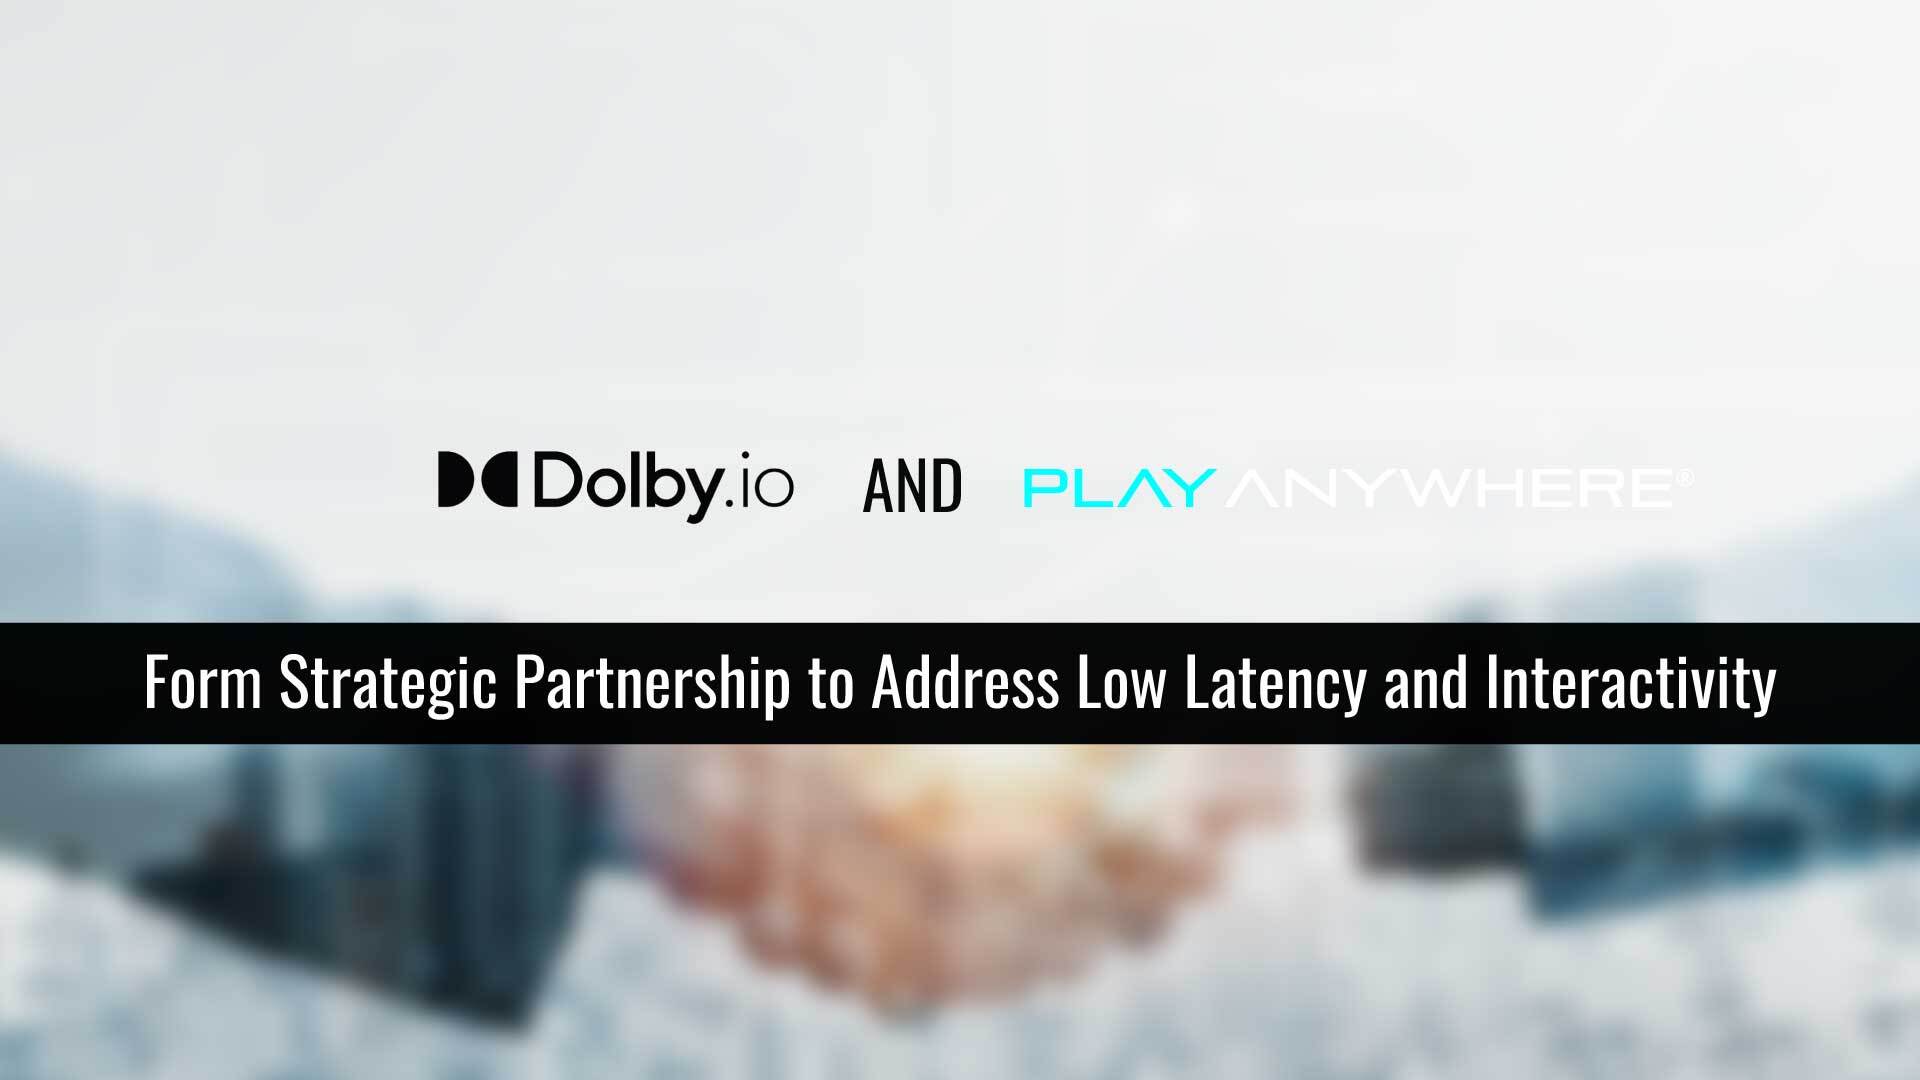 Dolby.io and Play Anywhere Form Strategic Partnership to Address Low Latency and Interactivity